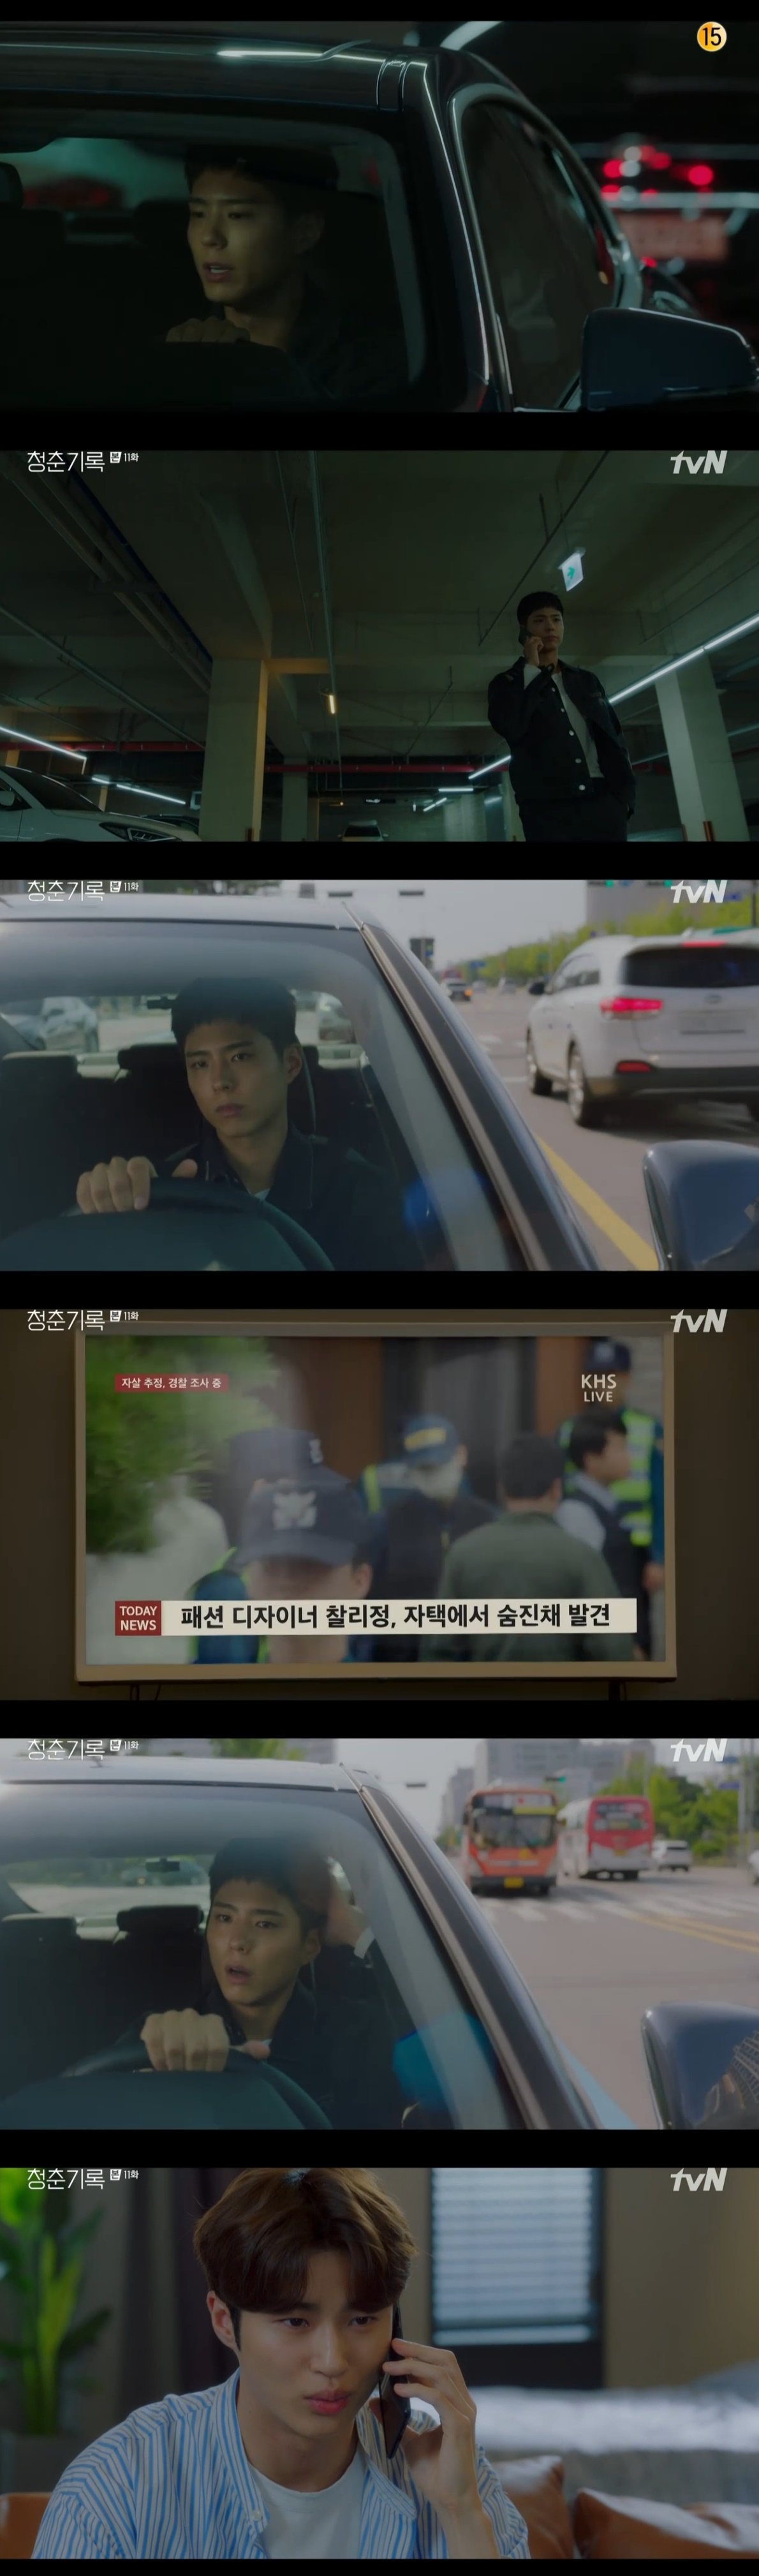 Record of Youth Park Bo-gum was Danger by Lee Seung-jun deathIn the TVN drama Record of Youth broadcast on the 12th, Sa Hye-joon (Park Bo-gum), who fell into Danger due to the death of Charlie Jung (Lee Seung-jun), was portrayed.On the same day, Hye-joon spoke to his manager Min-jae (Shin Dong-mi) and headed to the office. Min-jae announced that he was going to shoot a movie next month.I will make you tired. Min Jae replied, Walkerholic Star .But as soon as Hye-joon got out of the parking lot, he called me to attend Police as a reference for Charlies death.Hye-joon was surprised by the fact that he was not told exactly, which police book he said was Police. Later, news that fashion designer Charlie Jung died at home.While Hye-joon was heading to Police, Won Hae-hyo (Byeon Woo-suk) called Hye-joon.Hye-joon told Charlie Jeong that he had been in the absence a few days ago. Hae-hyo said, I would have been very surprised. The two decided to meet at the funeral hall.On the other hand, TVN Wolhwa drama Record of Youth is a drama depicting the growth Record of Youth people who try to achieve their dreams and love without despairing on the wall of reality.